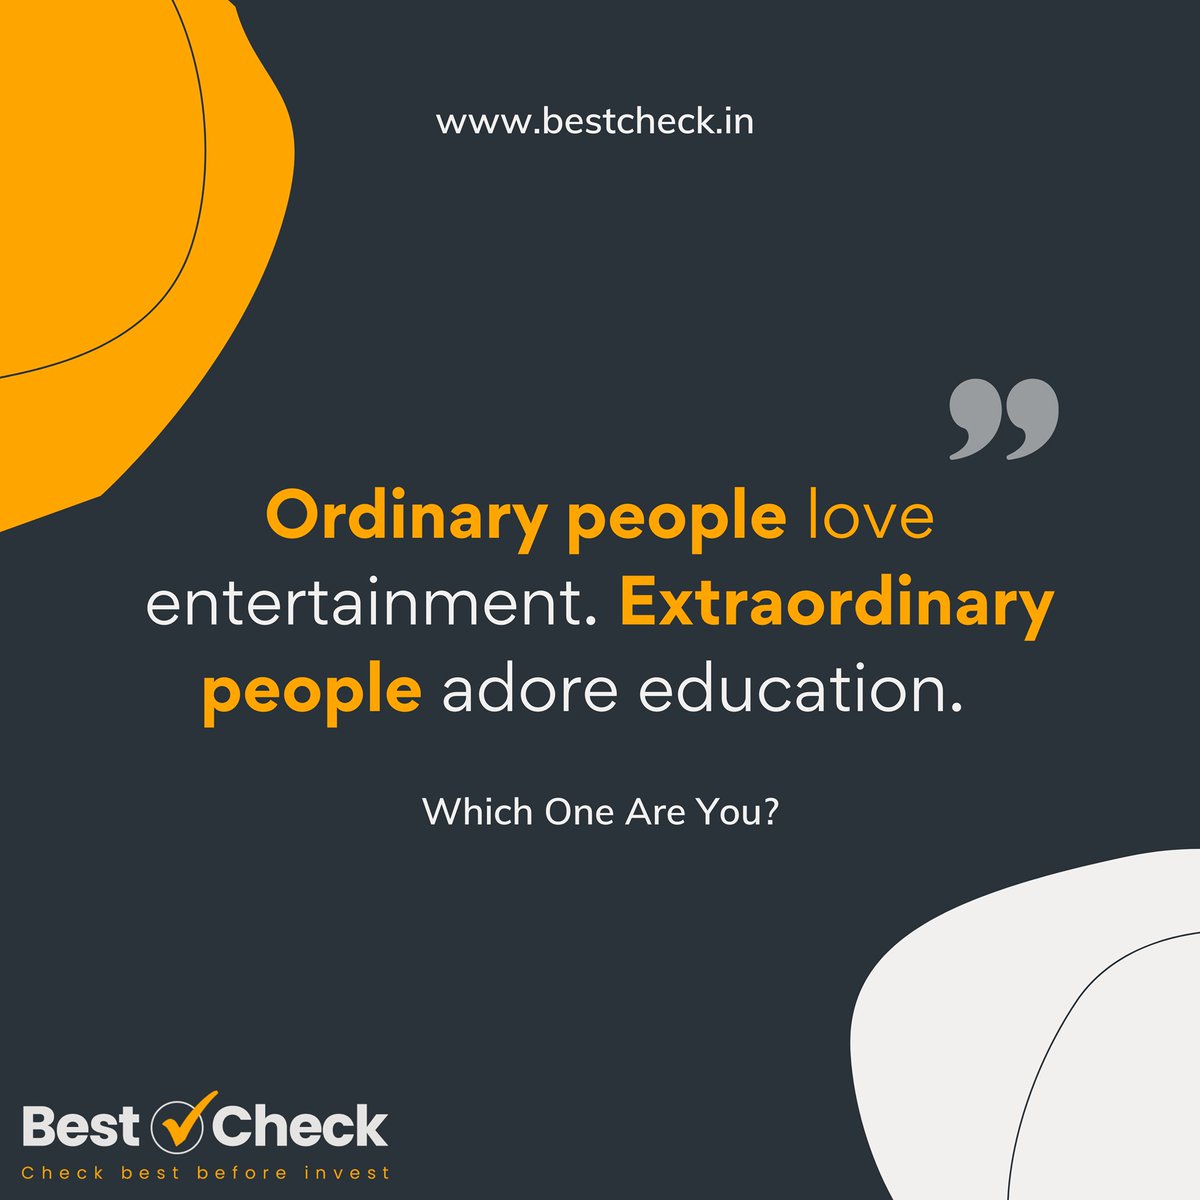 Thought of the day. 👓 Have a great week ahead. 🤩

Compare, read reviews and find the best products for shopping online at
bestcheck.in

#bestcheckindia #bestcheck #coffeemakers #electronics #productreviewer #kitchengadget #kitchenplanning #cookingrange #kitchenlife